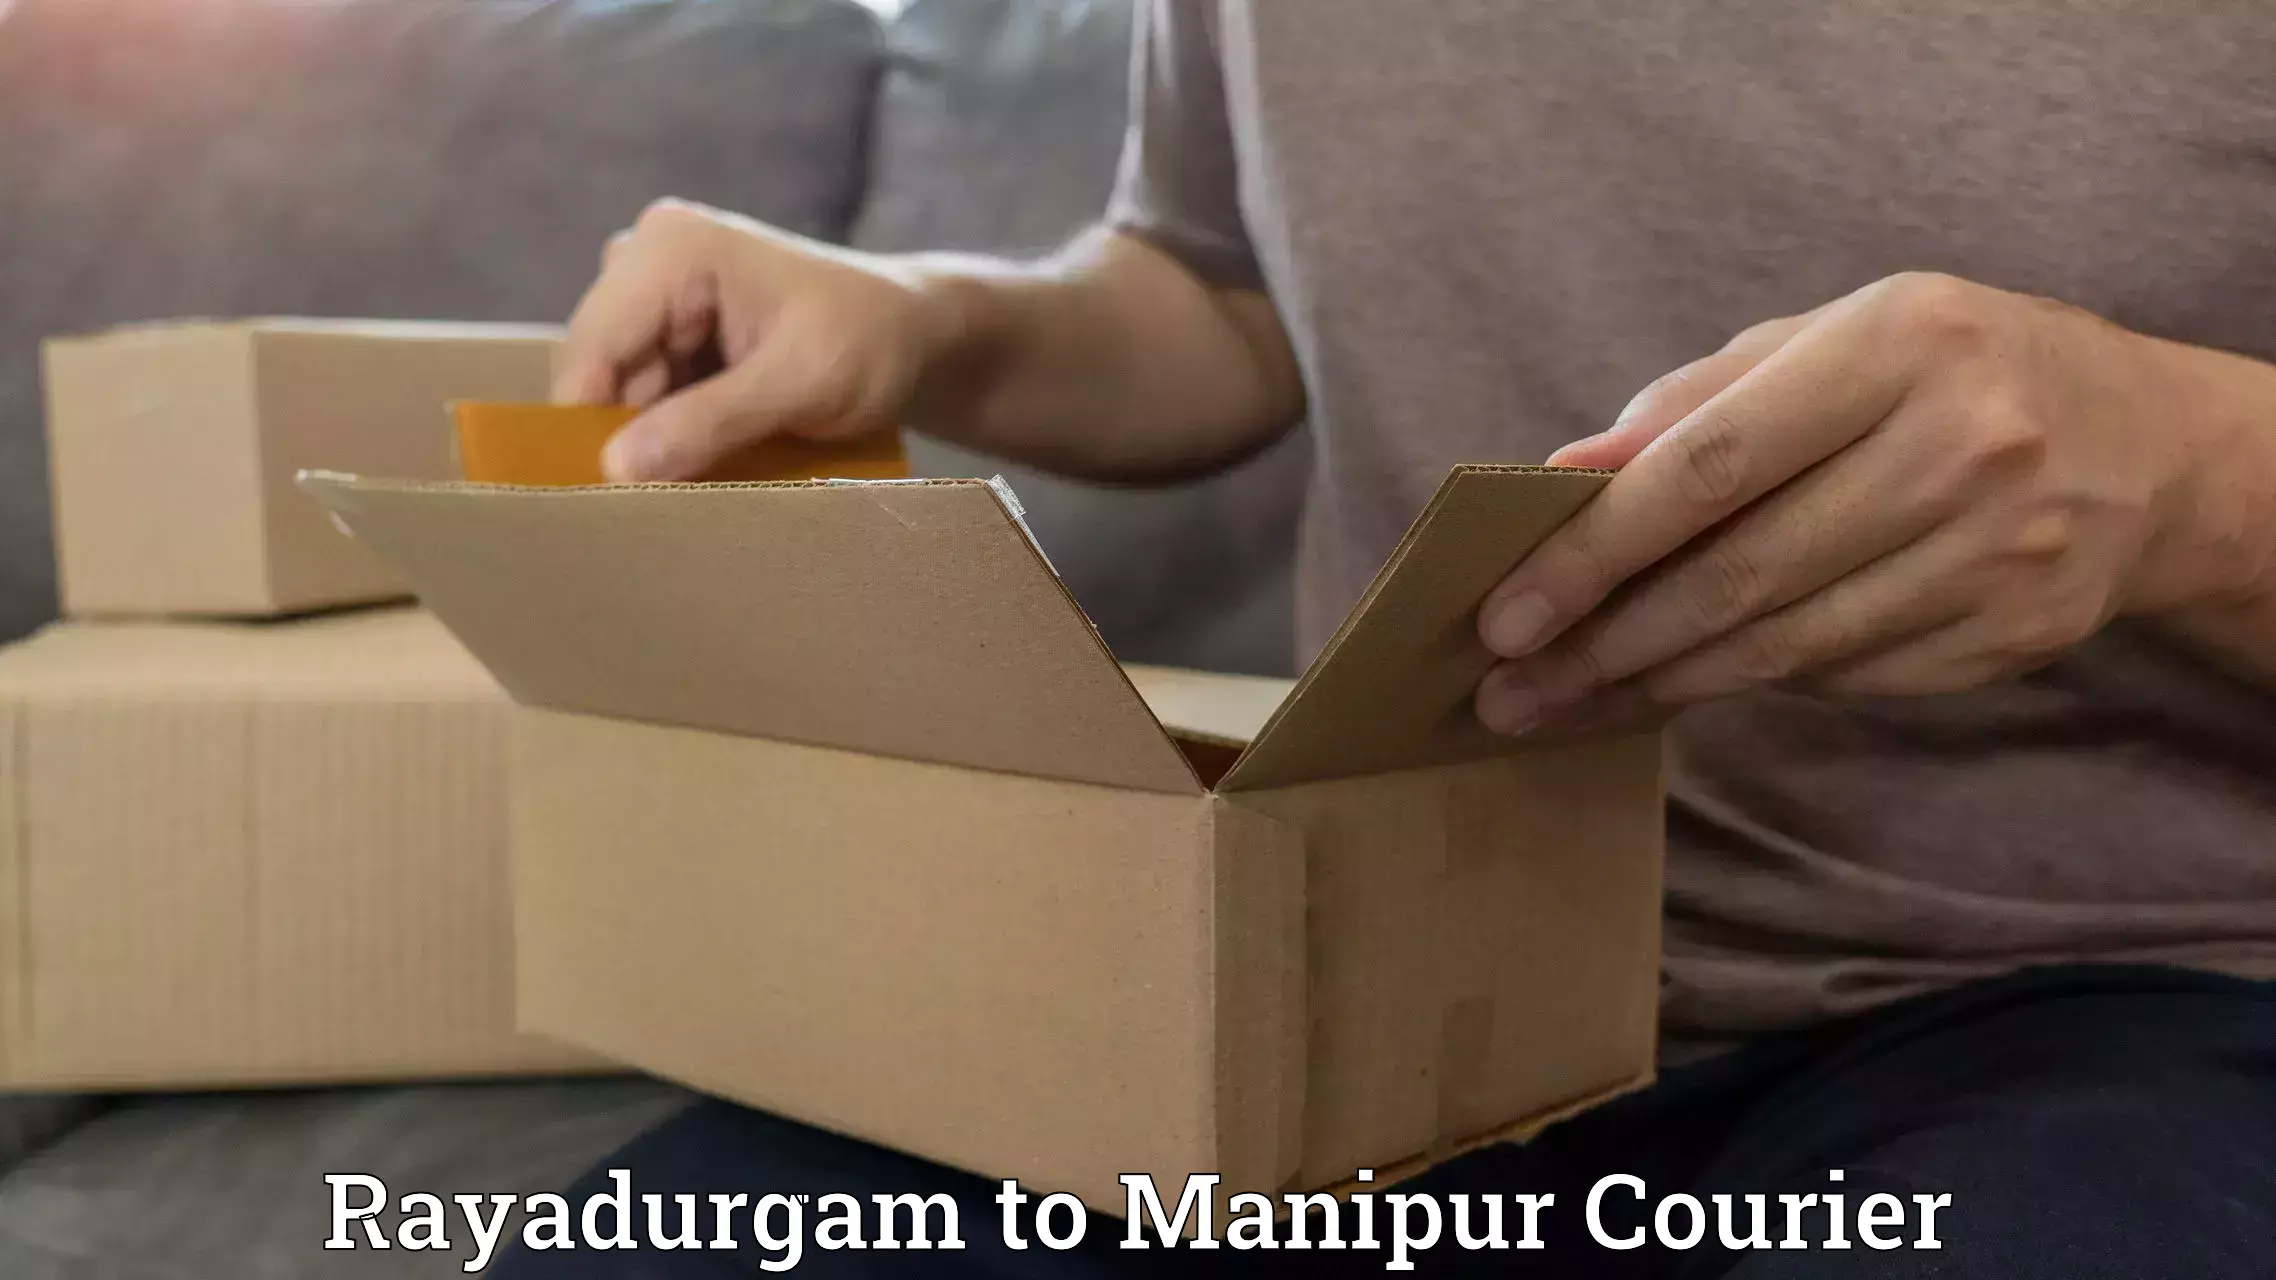 Courier service booking Rayadurgam to Manipur